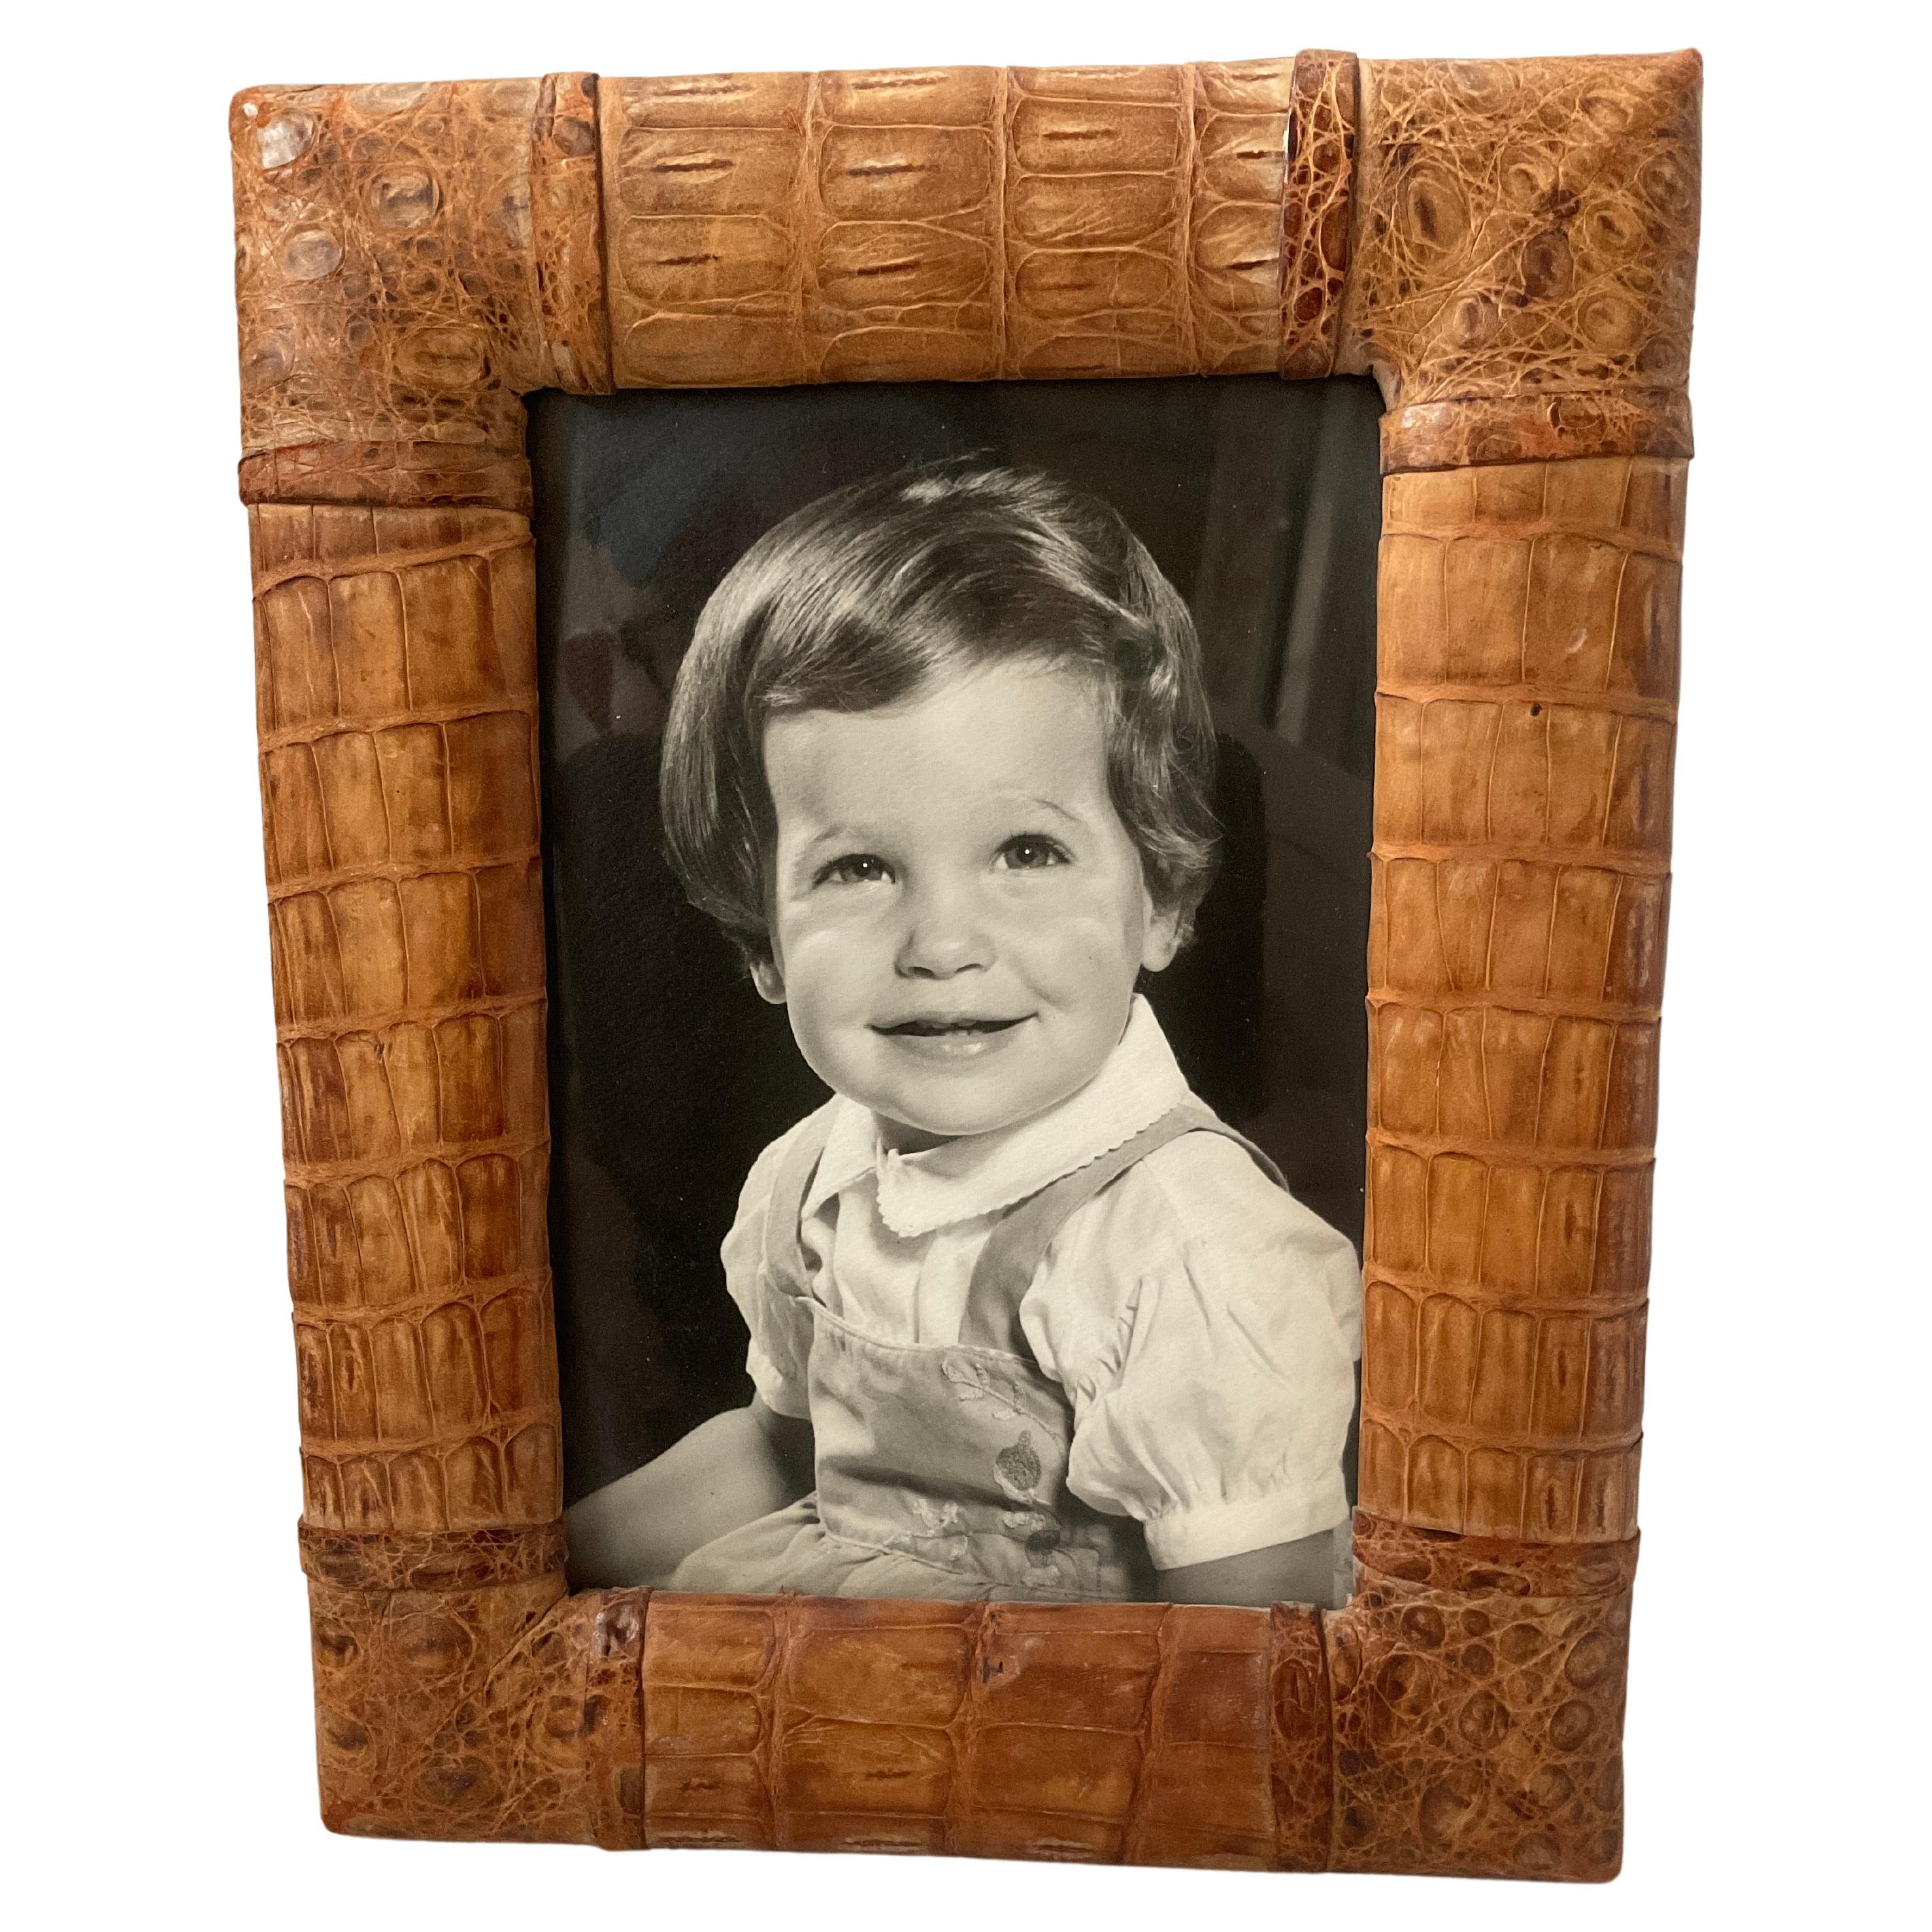 1950s Cuban Crocodile Picture Frame . Opening Is 6.25 x 4.5